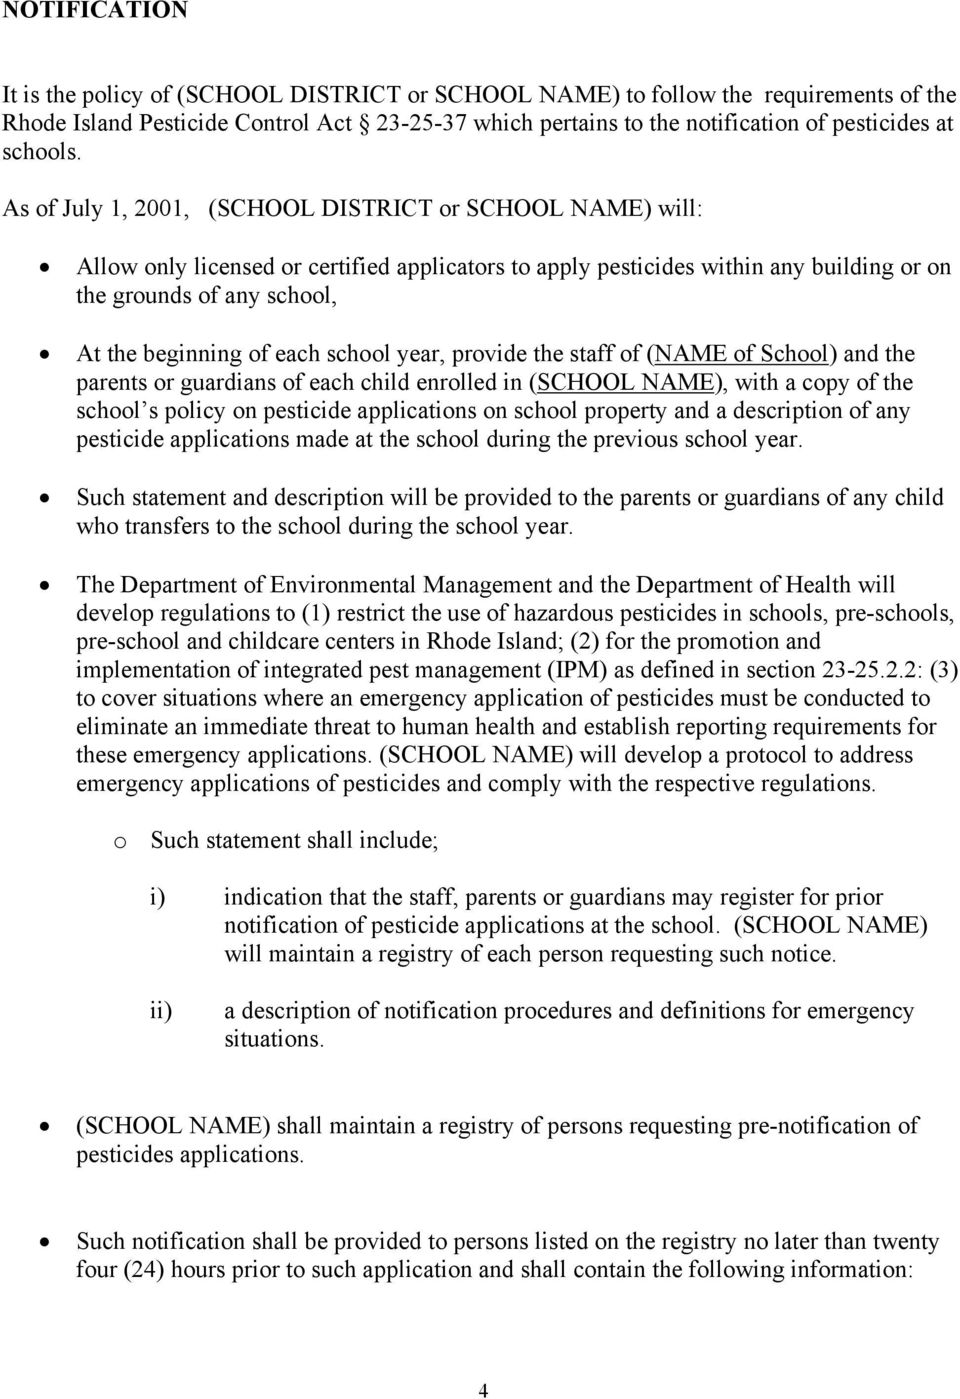 As of July 1, 2001, (SCHOOL DISTRICT or SCHOOL NAME) will: Allow only licensed or certified applicators to apply pesticides within any building or on the grounds of any school, At the beginning of